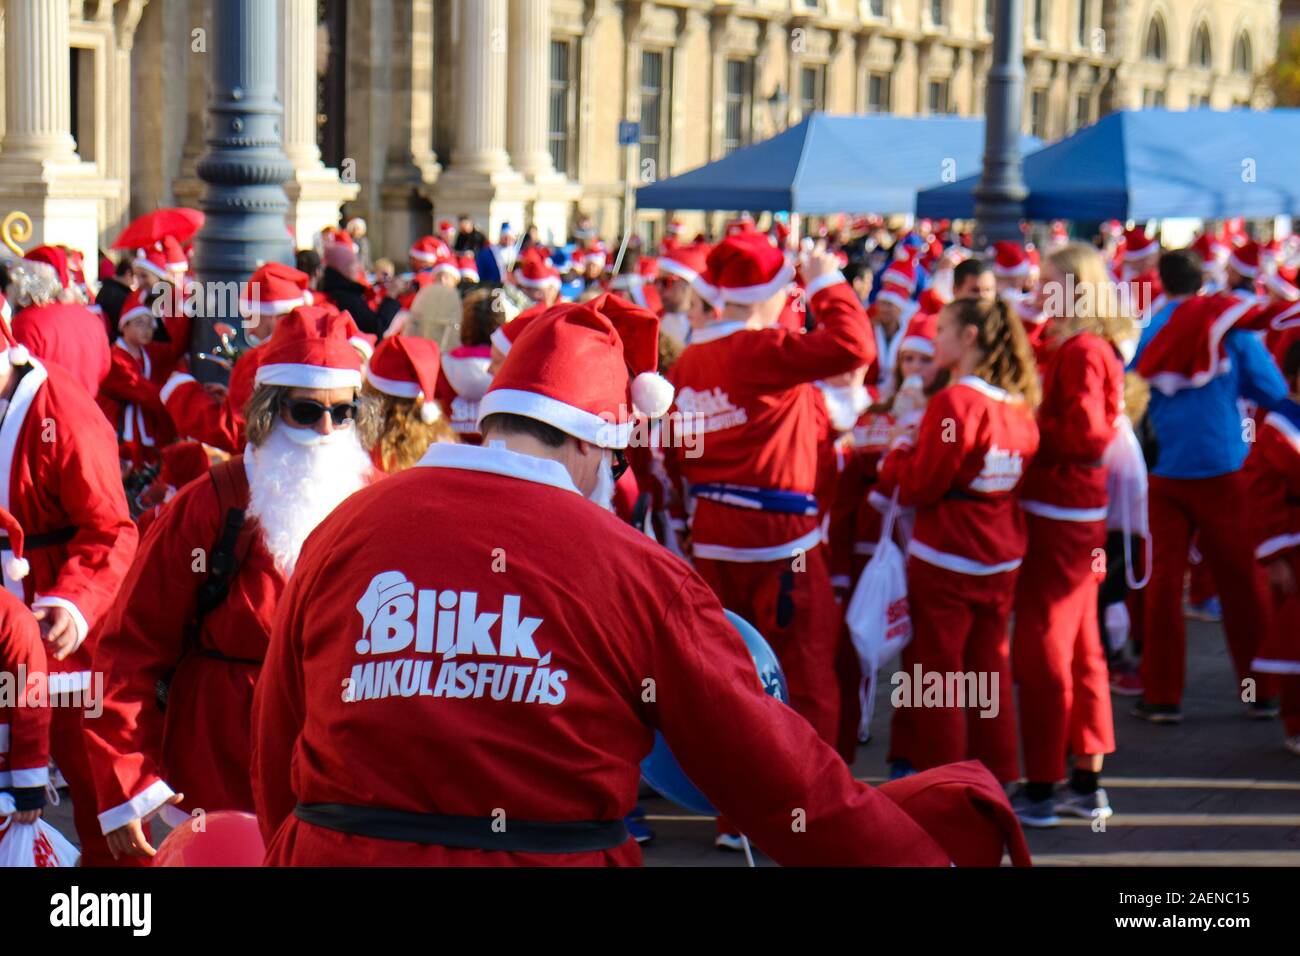 Budapest, Hungary - December 8, 2019: Participants in Santa Clause costumes at the finishing line of the 7th Santa Claus Charity Run of Budapest, capital of Hungary. Stock Photo